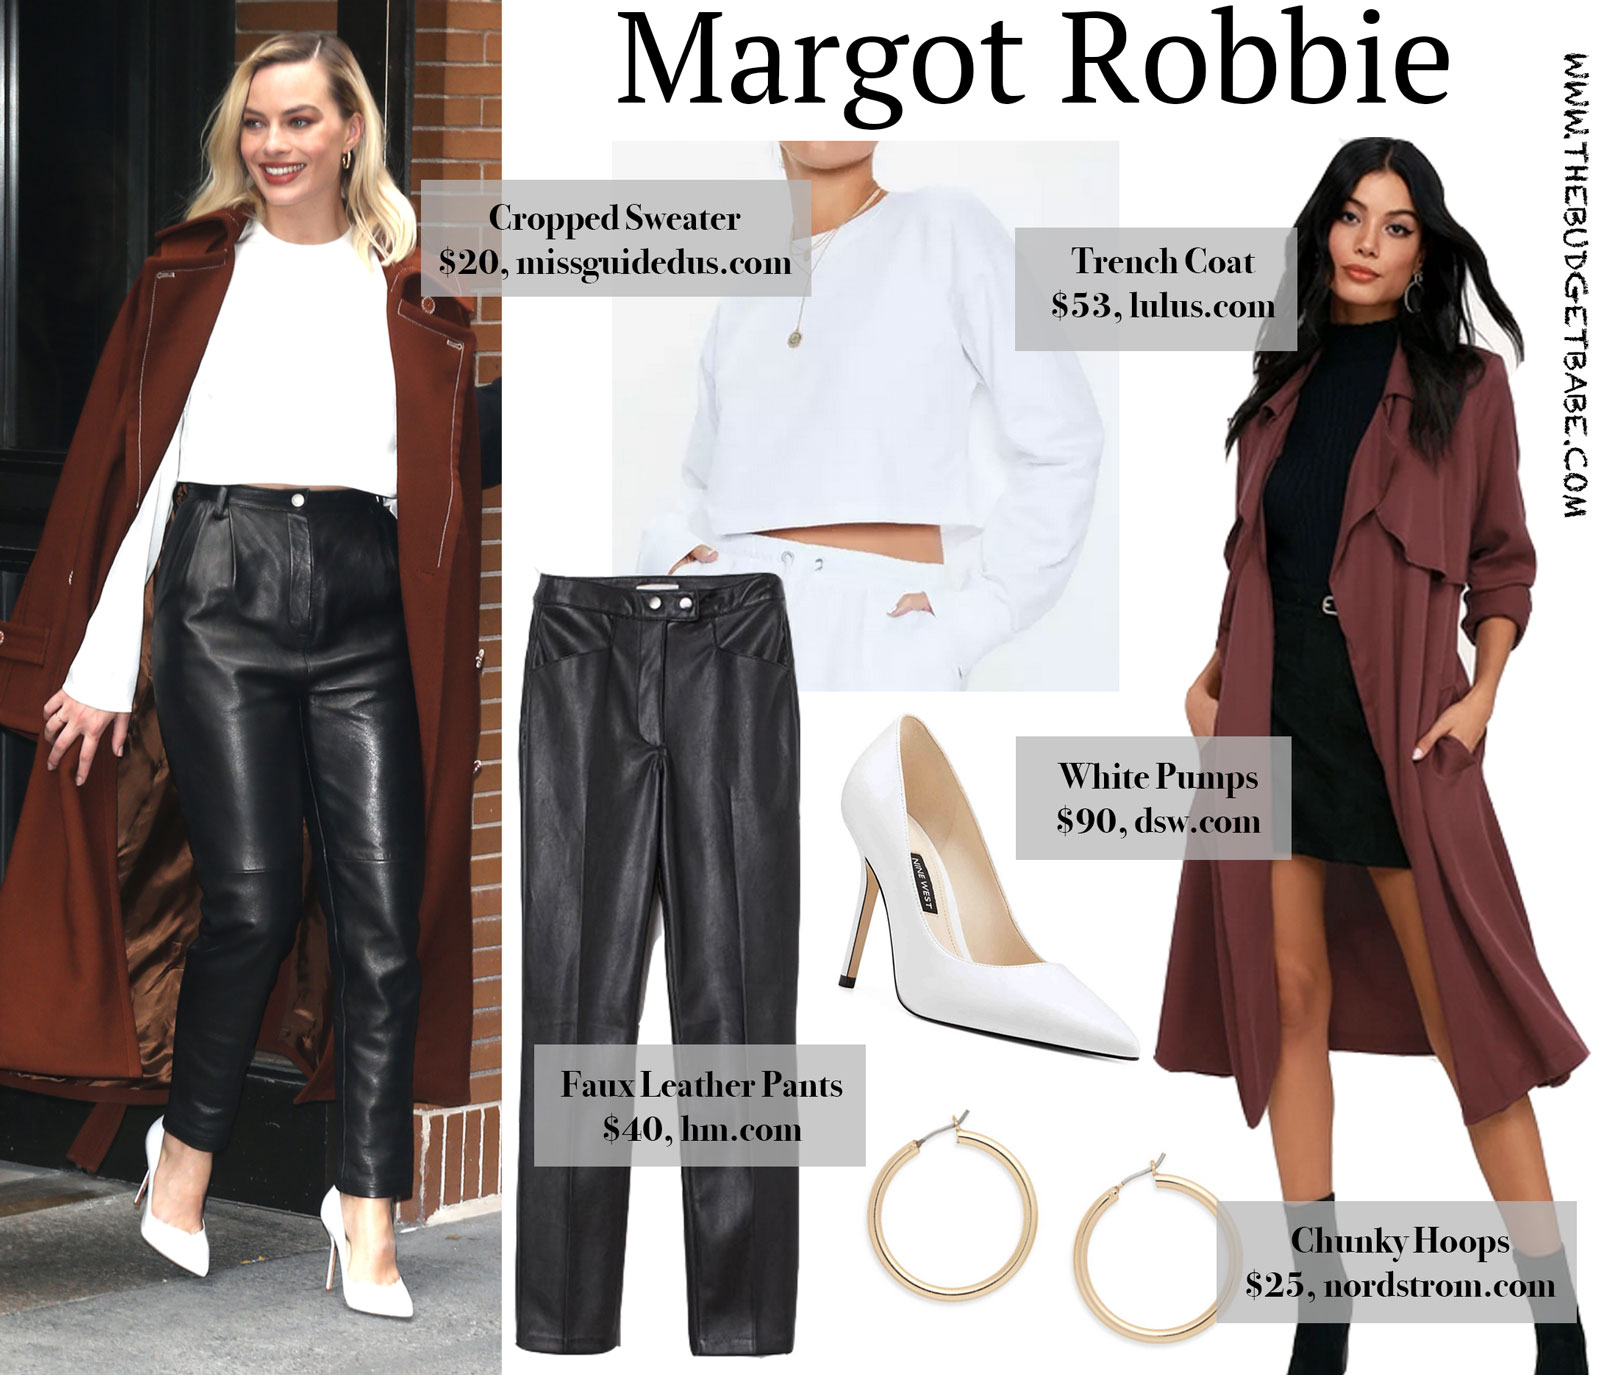 Margot Robbie Red Coat and Leather Pants Look for Less